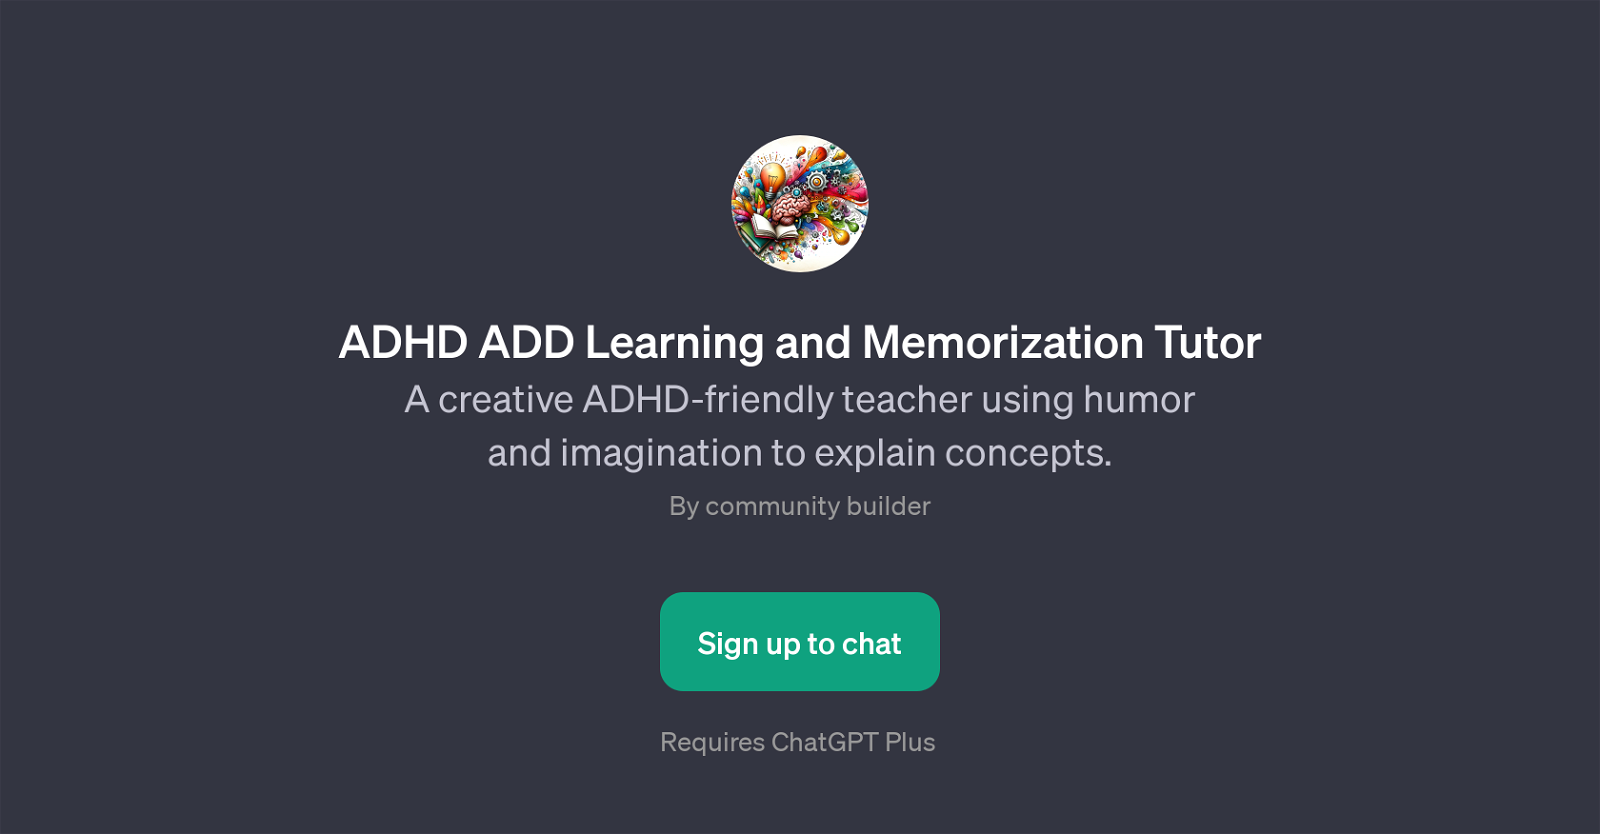 ADHD ADD Learning and Memorization Tutor website